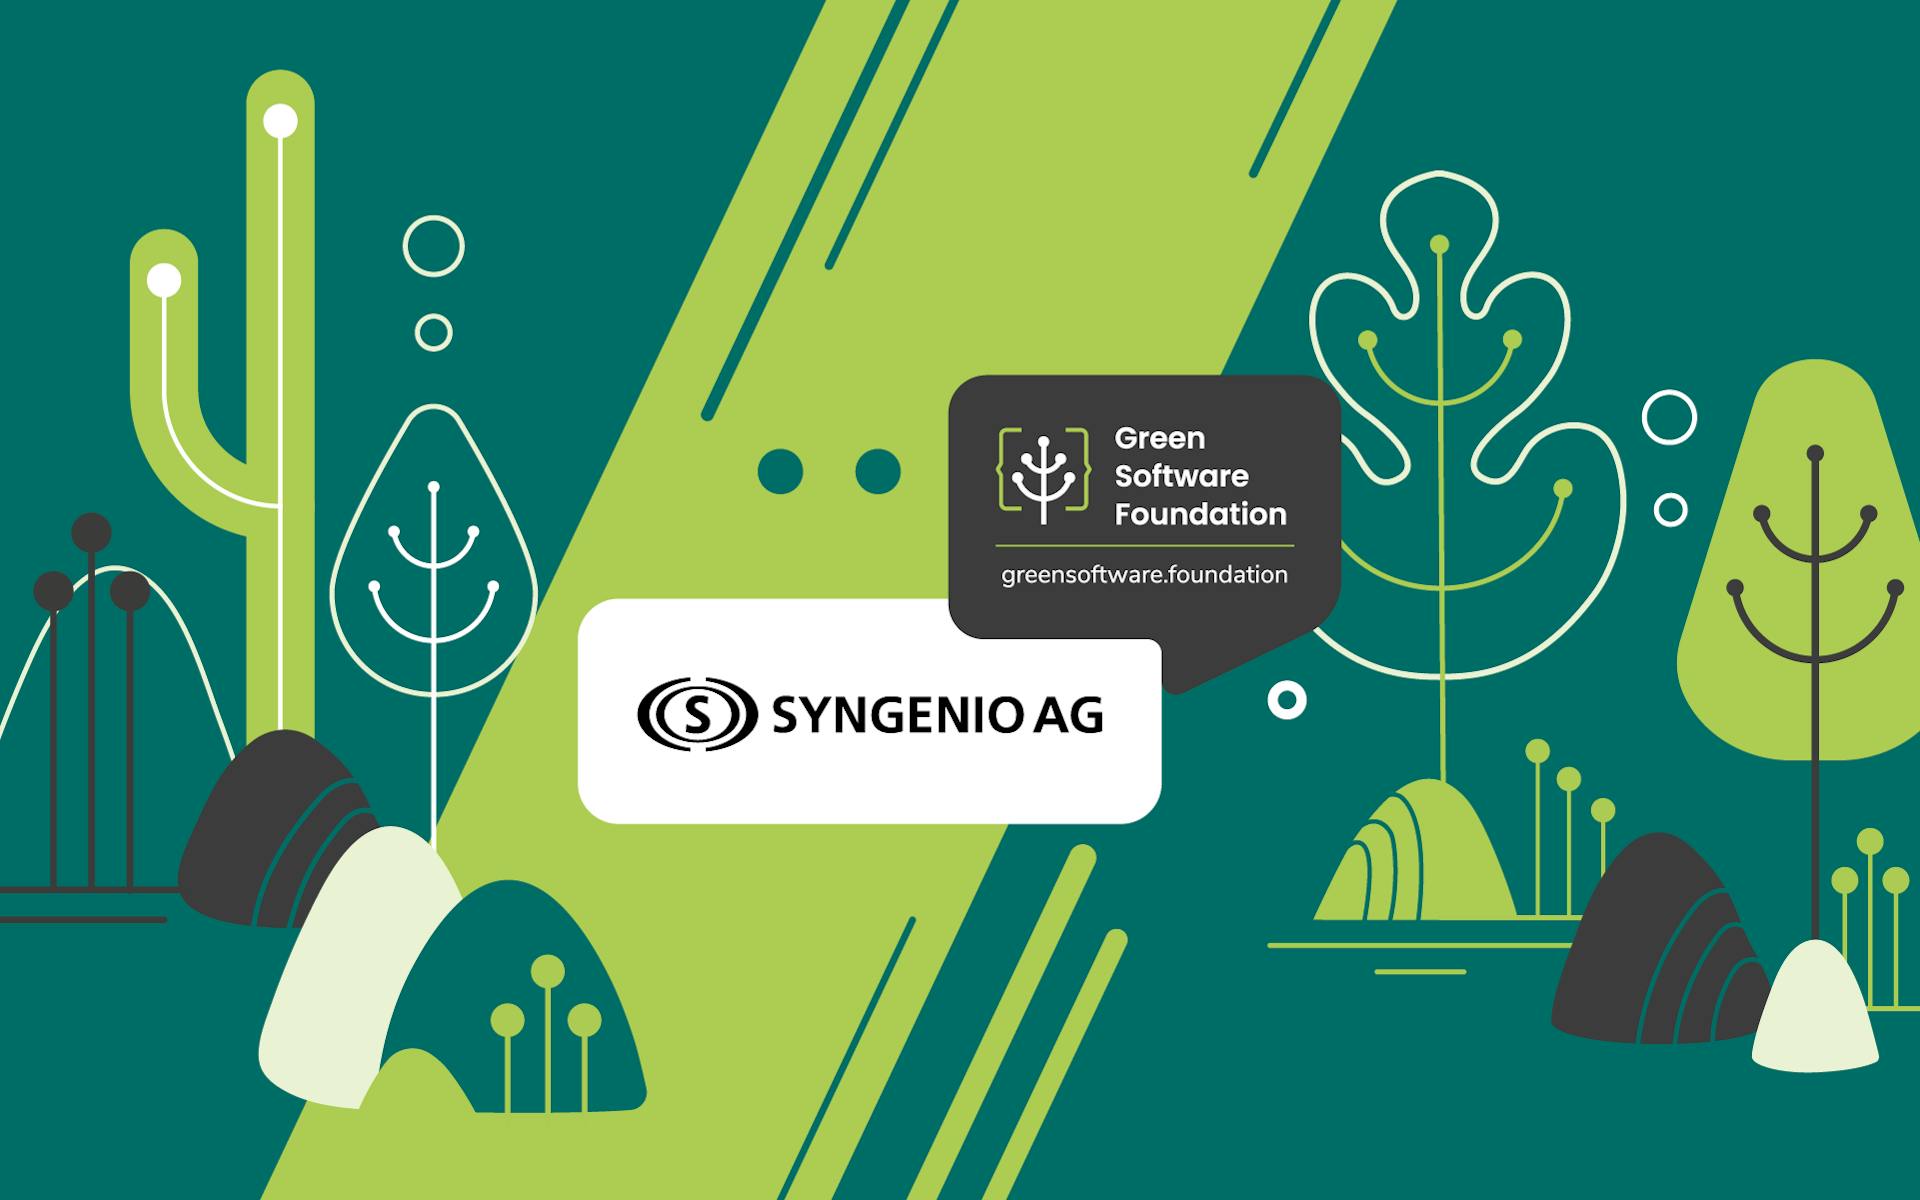 Syngenio AG Joins the Green Software Foundation